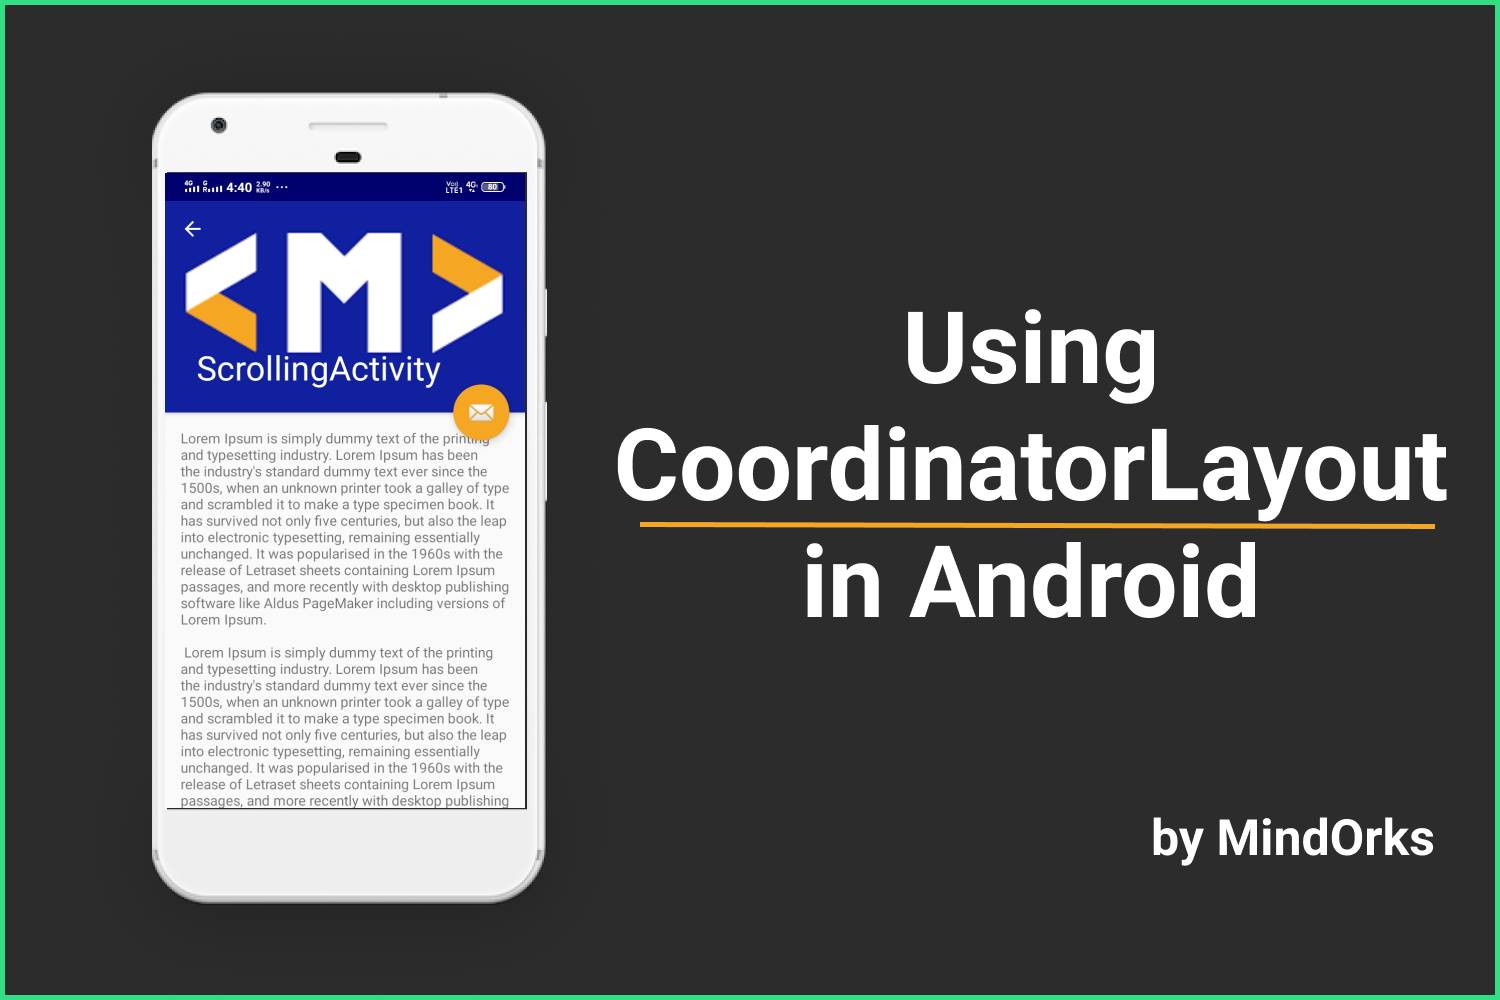 Using Coordinator Layout in Android